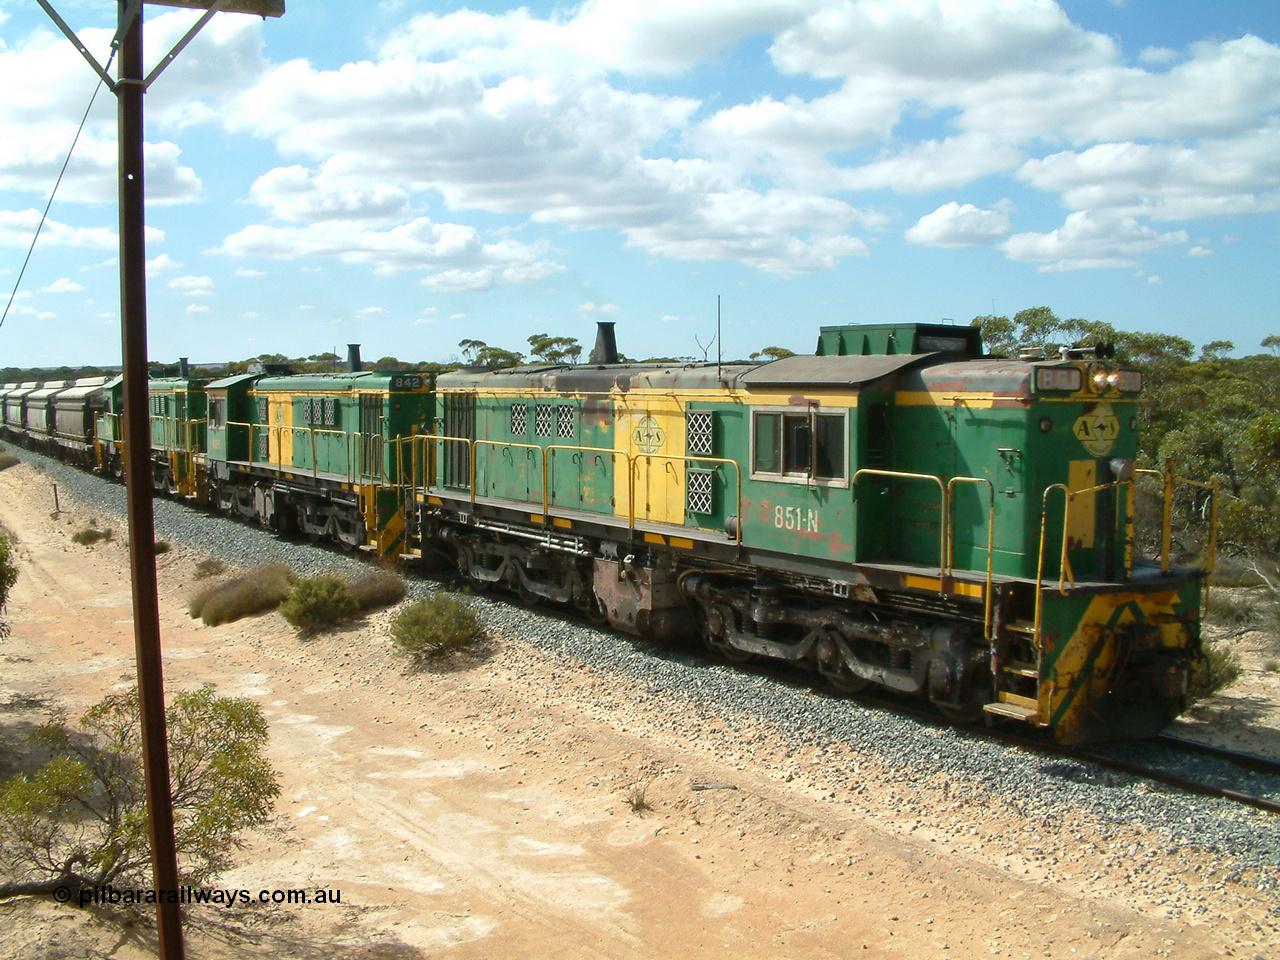 030409 110610
Caralue, loaded grain train working south of the former station site 830 class unit 851 AE Goodwin ALCo model DL531 serial 84137, 851 has spent its entire operating career on the Eyre Peninsula, it leads fellow 830 class 842 serial 84140 and a rebuilt unit DA 4, rebuilt from 830 class unit 839 by Port Augusta Workshops, retains original serial 83730 and model DL531 and two XNW grain waggons.
Keywords: 830-class;851;84137;AE-Goodwin;ALCo;DL531;